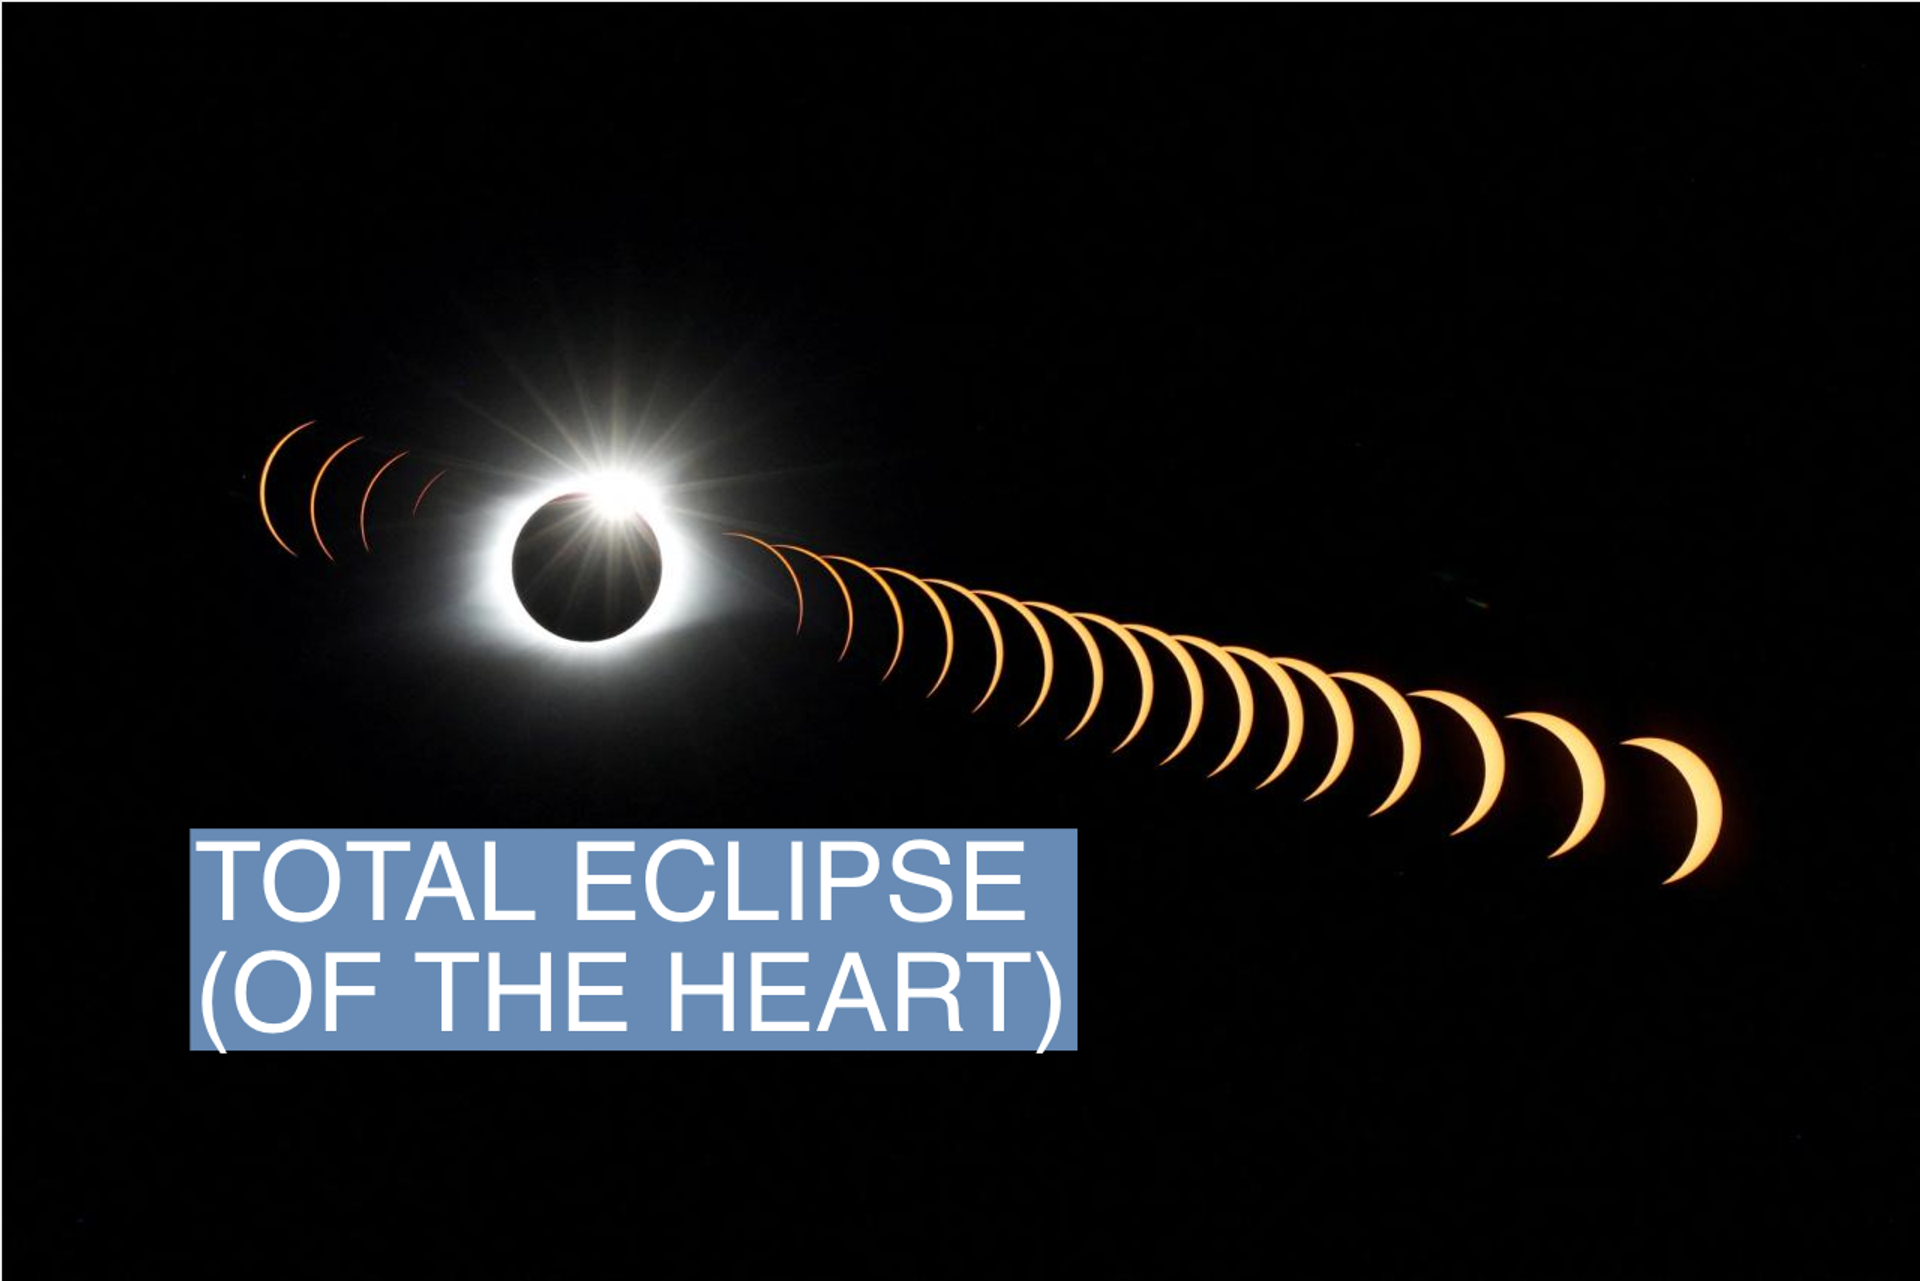 A composite image of 21 separate photographs taken with a single fixed camera shows the solar eclipse as it creates the effect of a diamond ring at totality as seen from Clingmans Dome, which at 6,643 feet (2,025m) is the highest point in the Great Smoky Mountains National Park, Tennessee, on Aug. 21, 2017